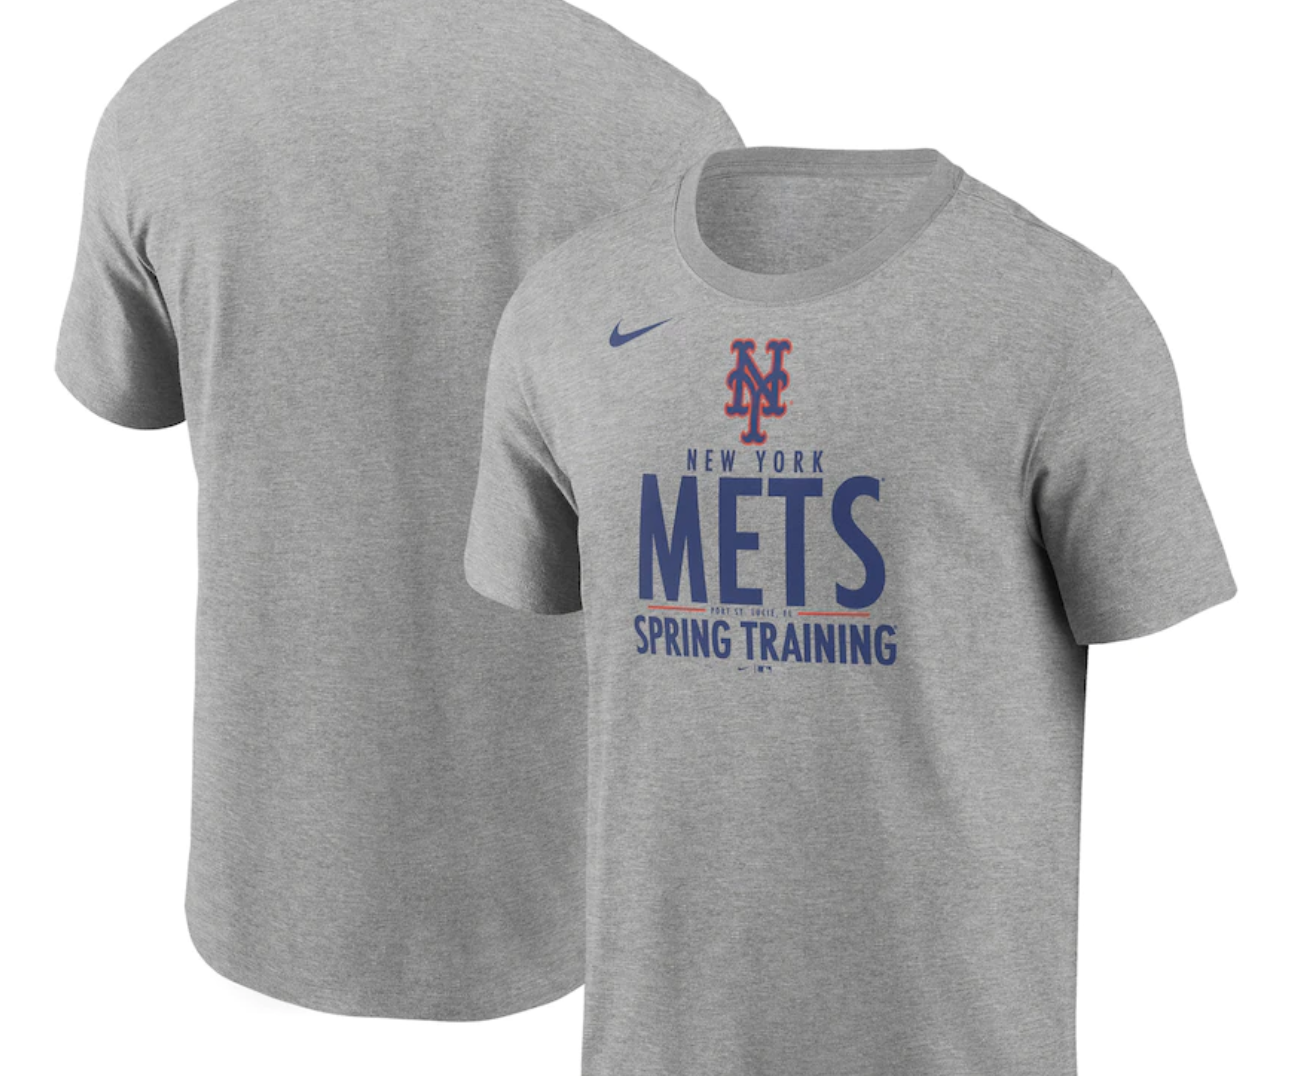 MLB Spring Training gear: Where to buy NY Yankees, Mets hats